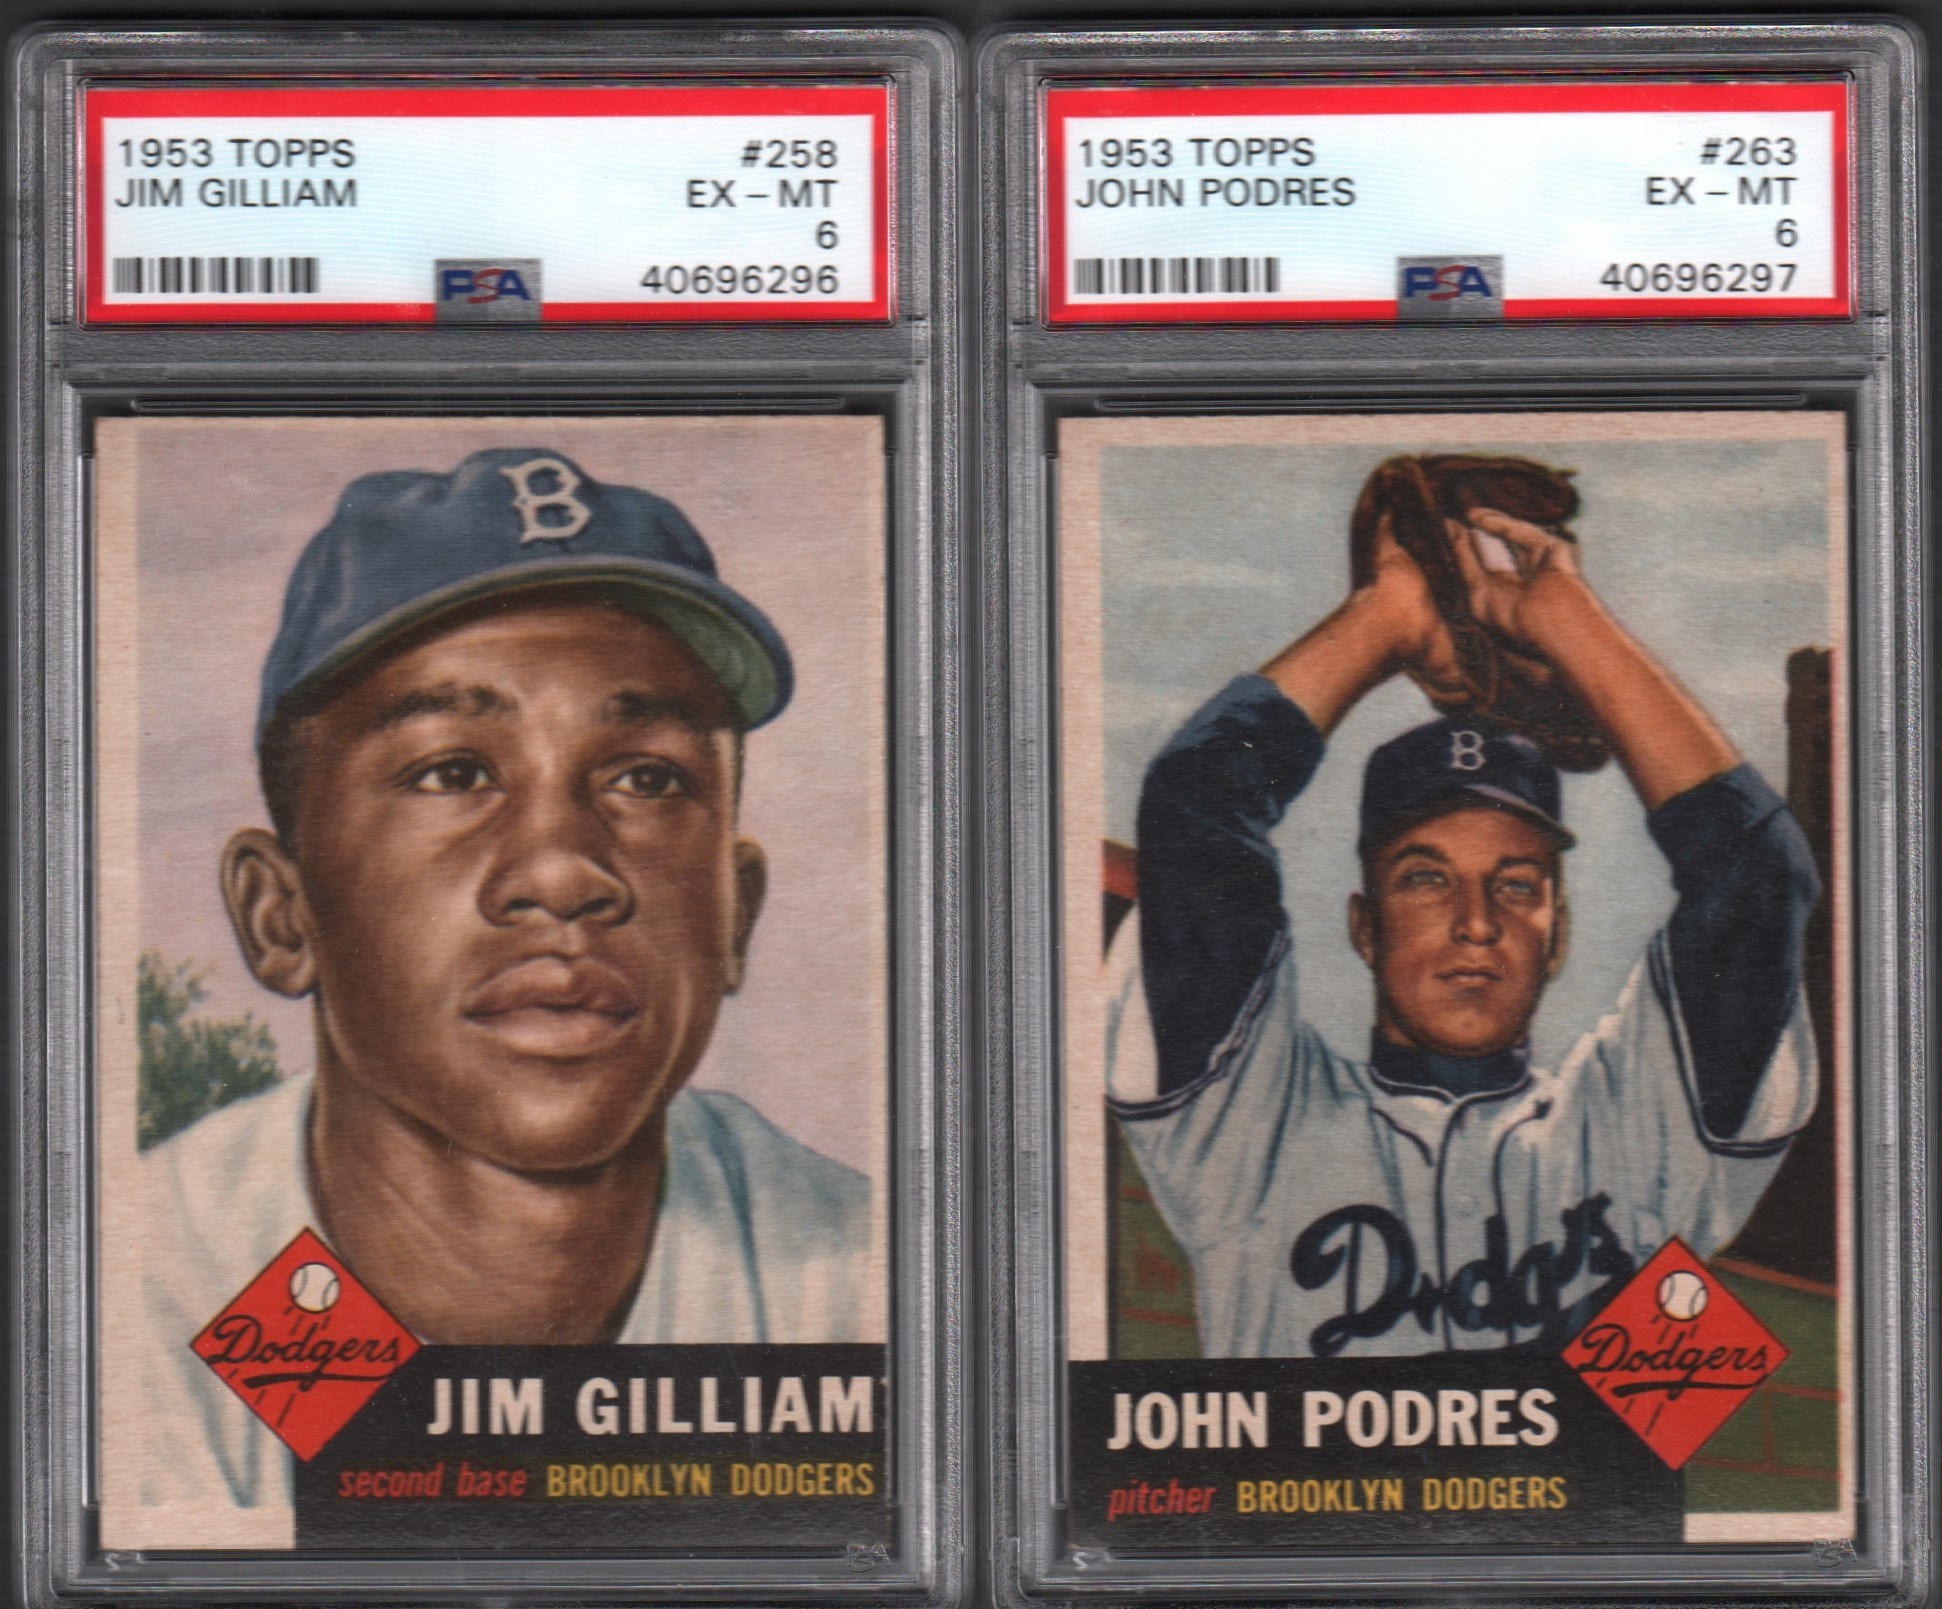 - 1953 Topps Brooklyn Dodgers PSA EX-MT 6 Rookie Card Pair - Podres and Gilliam